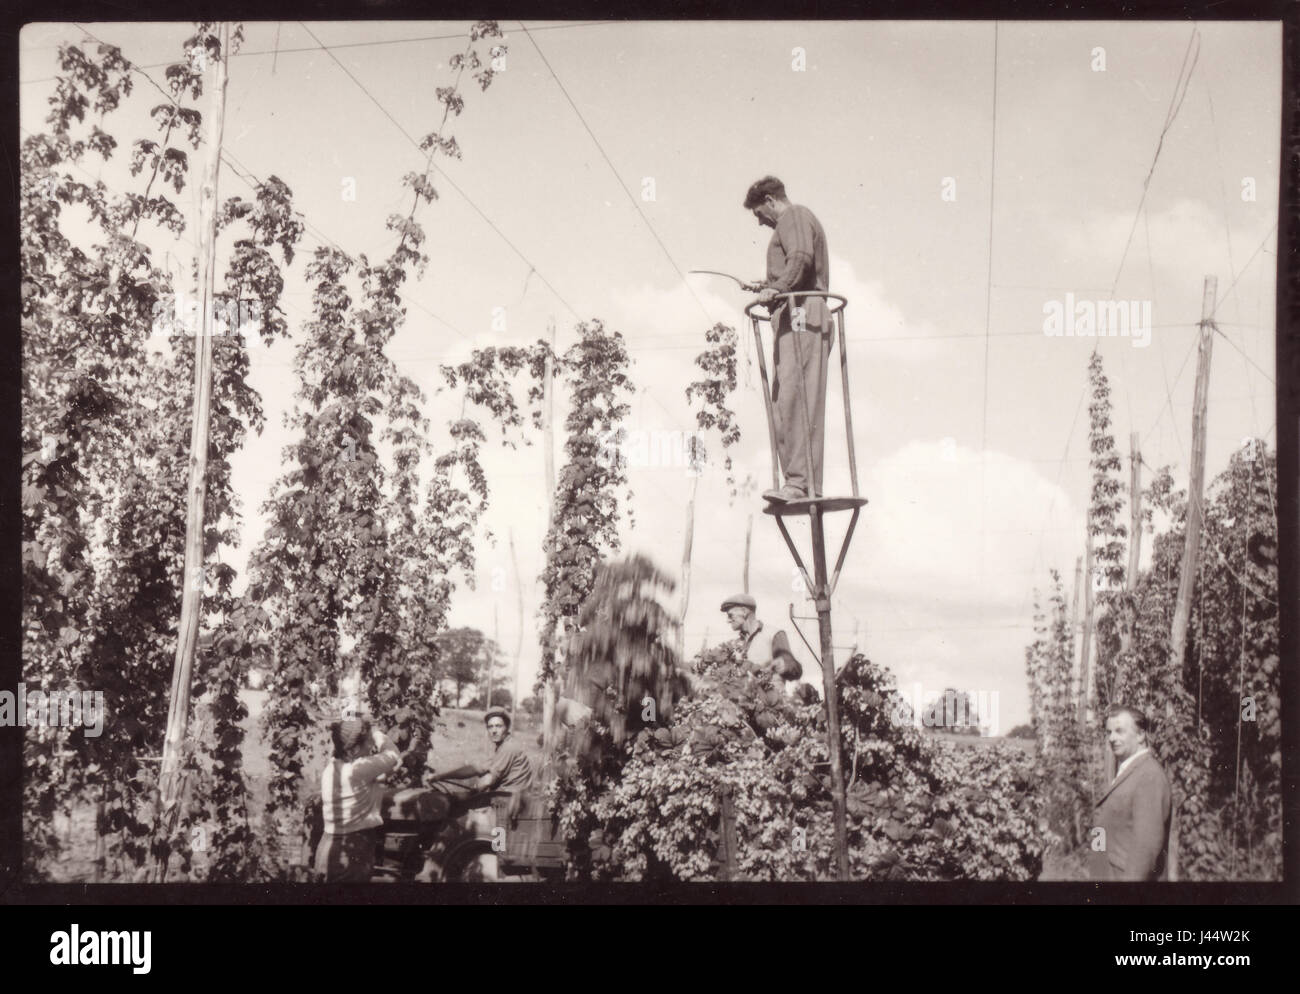 Kentish hop pickers with a  man known as a pole-puller perched on a stilt, using a bill hook to cut down the hop bines (vines) circa. 1950's, Kent, U.K. Stock Photo